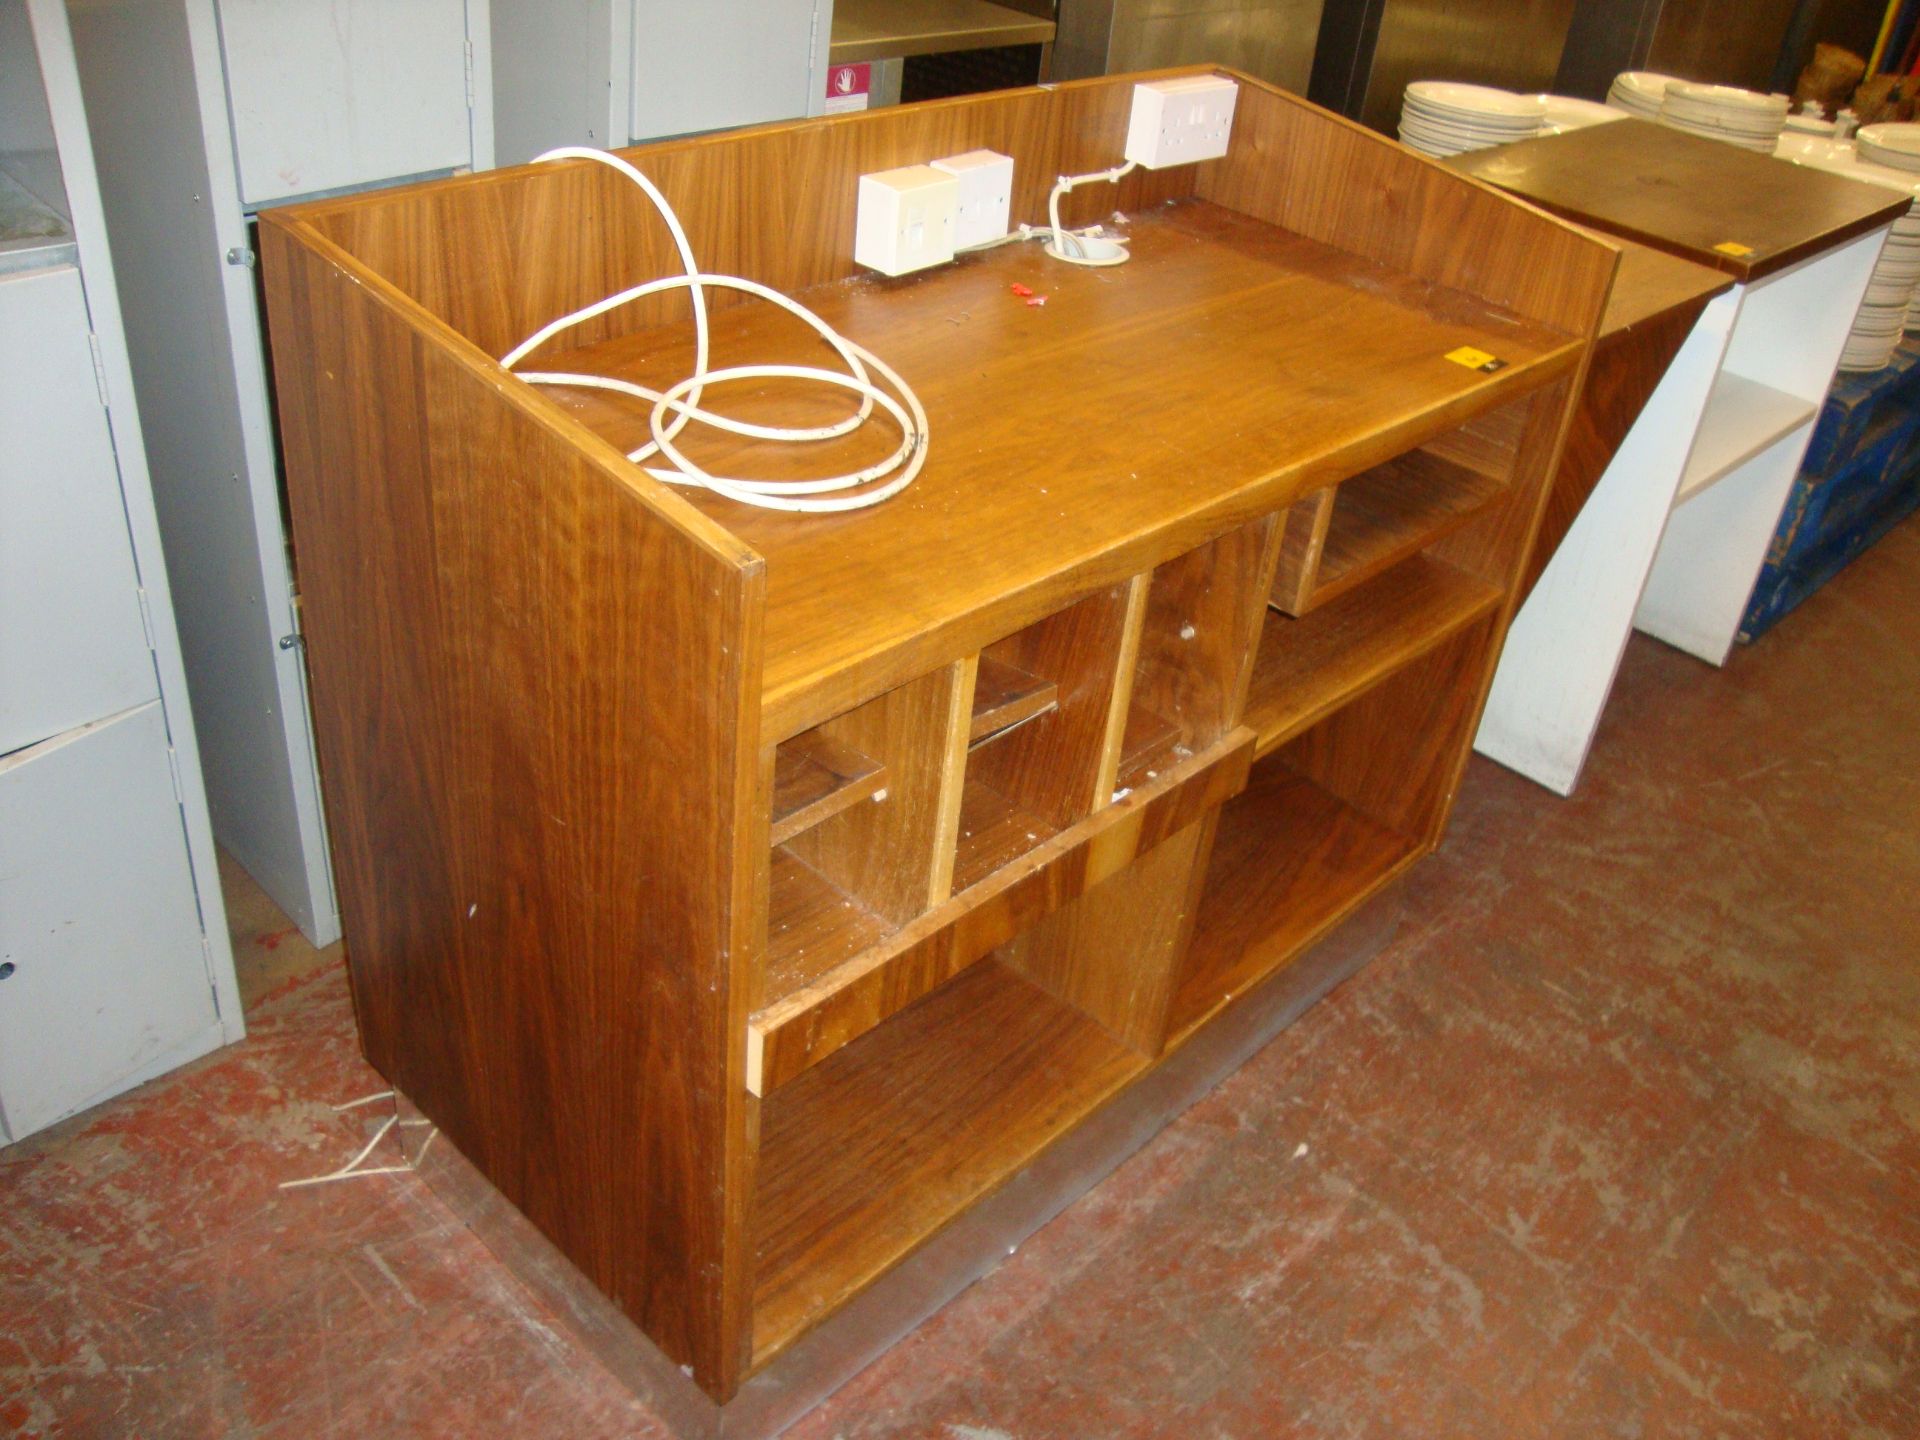 Wooden serving/buffet unit with built-in electrics & phone sockets, incorporating extending shelf,